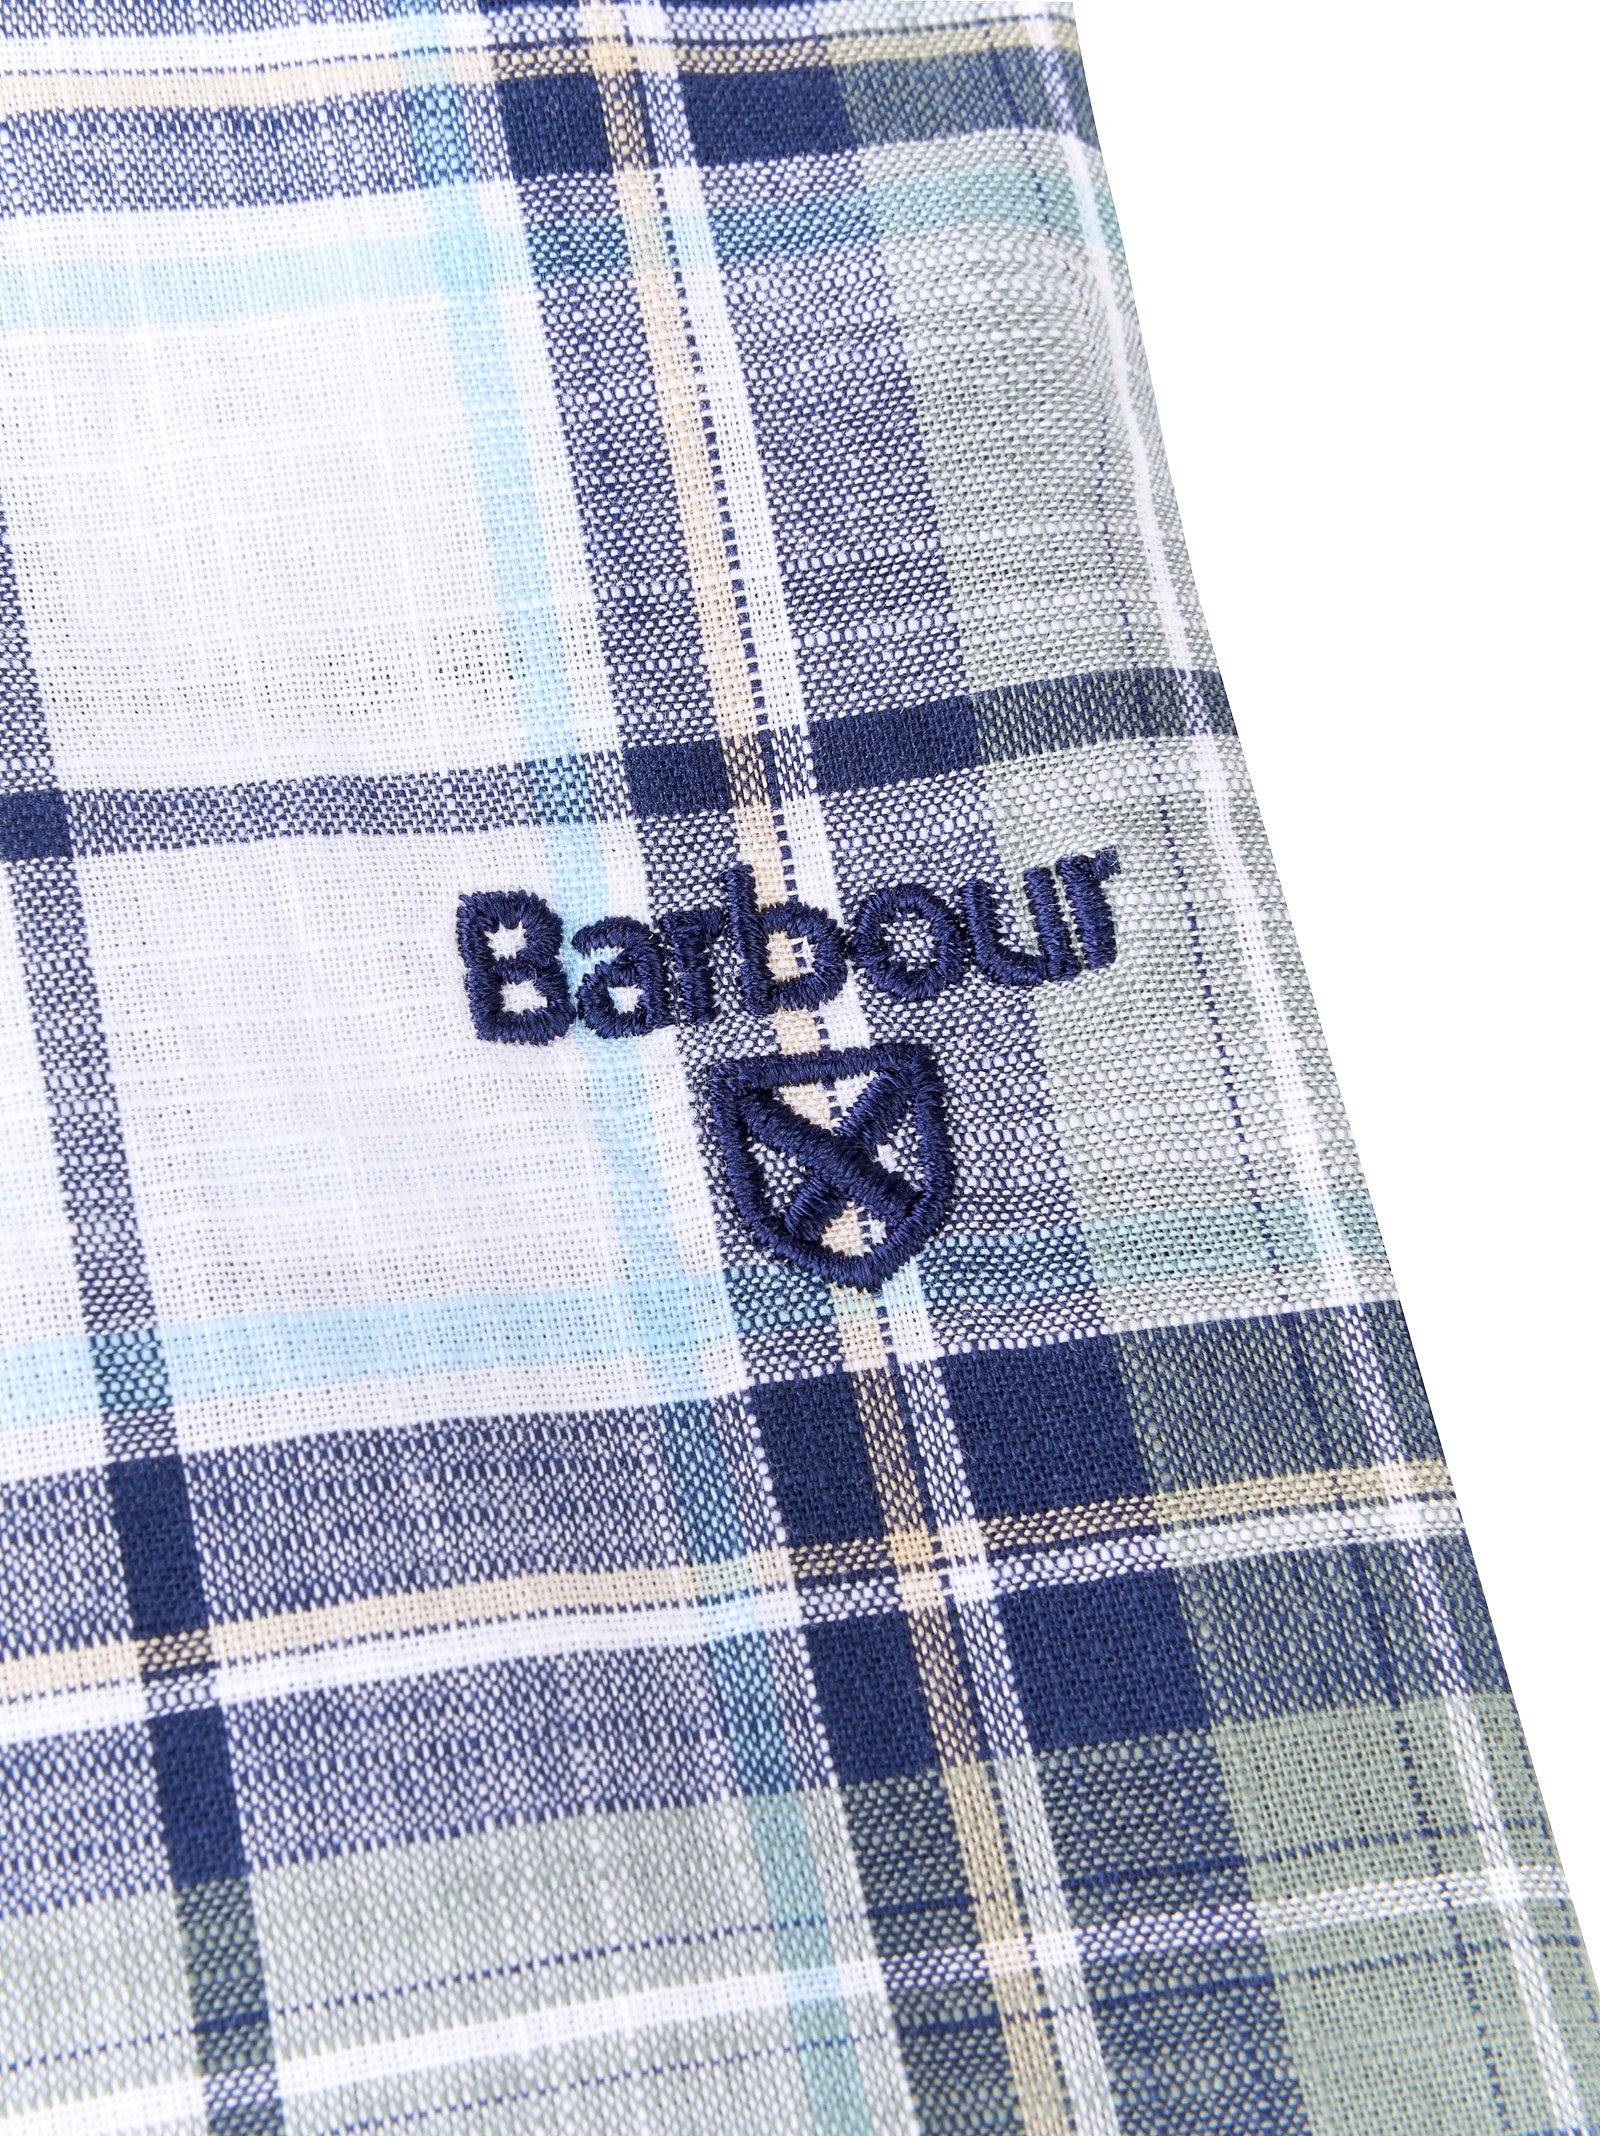 Camicia BARBOUR
Agave green